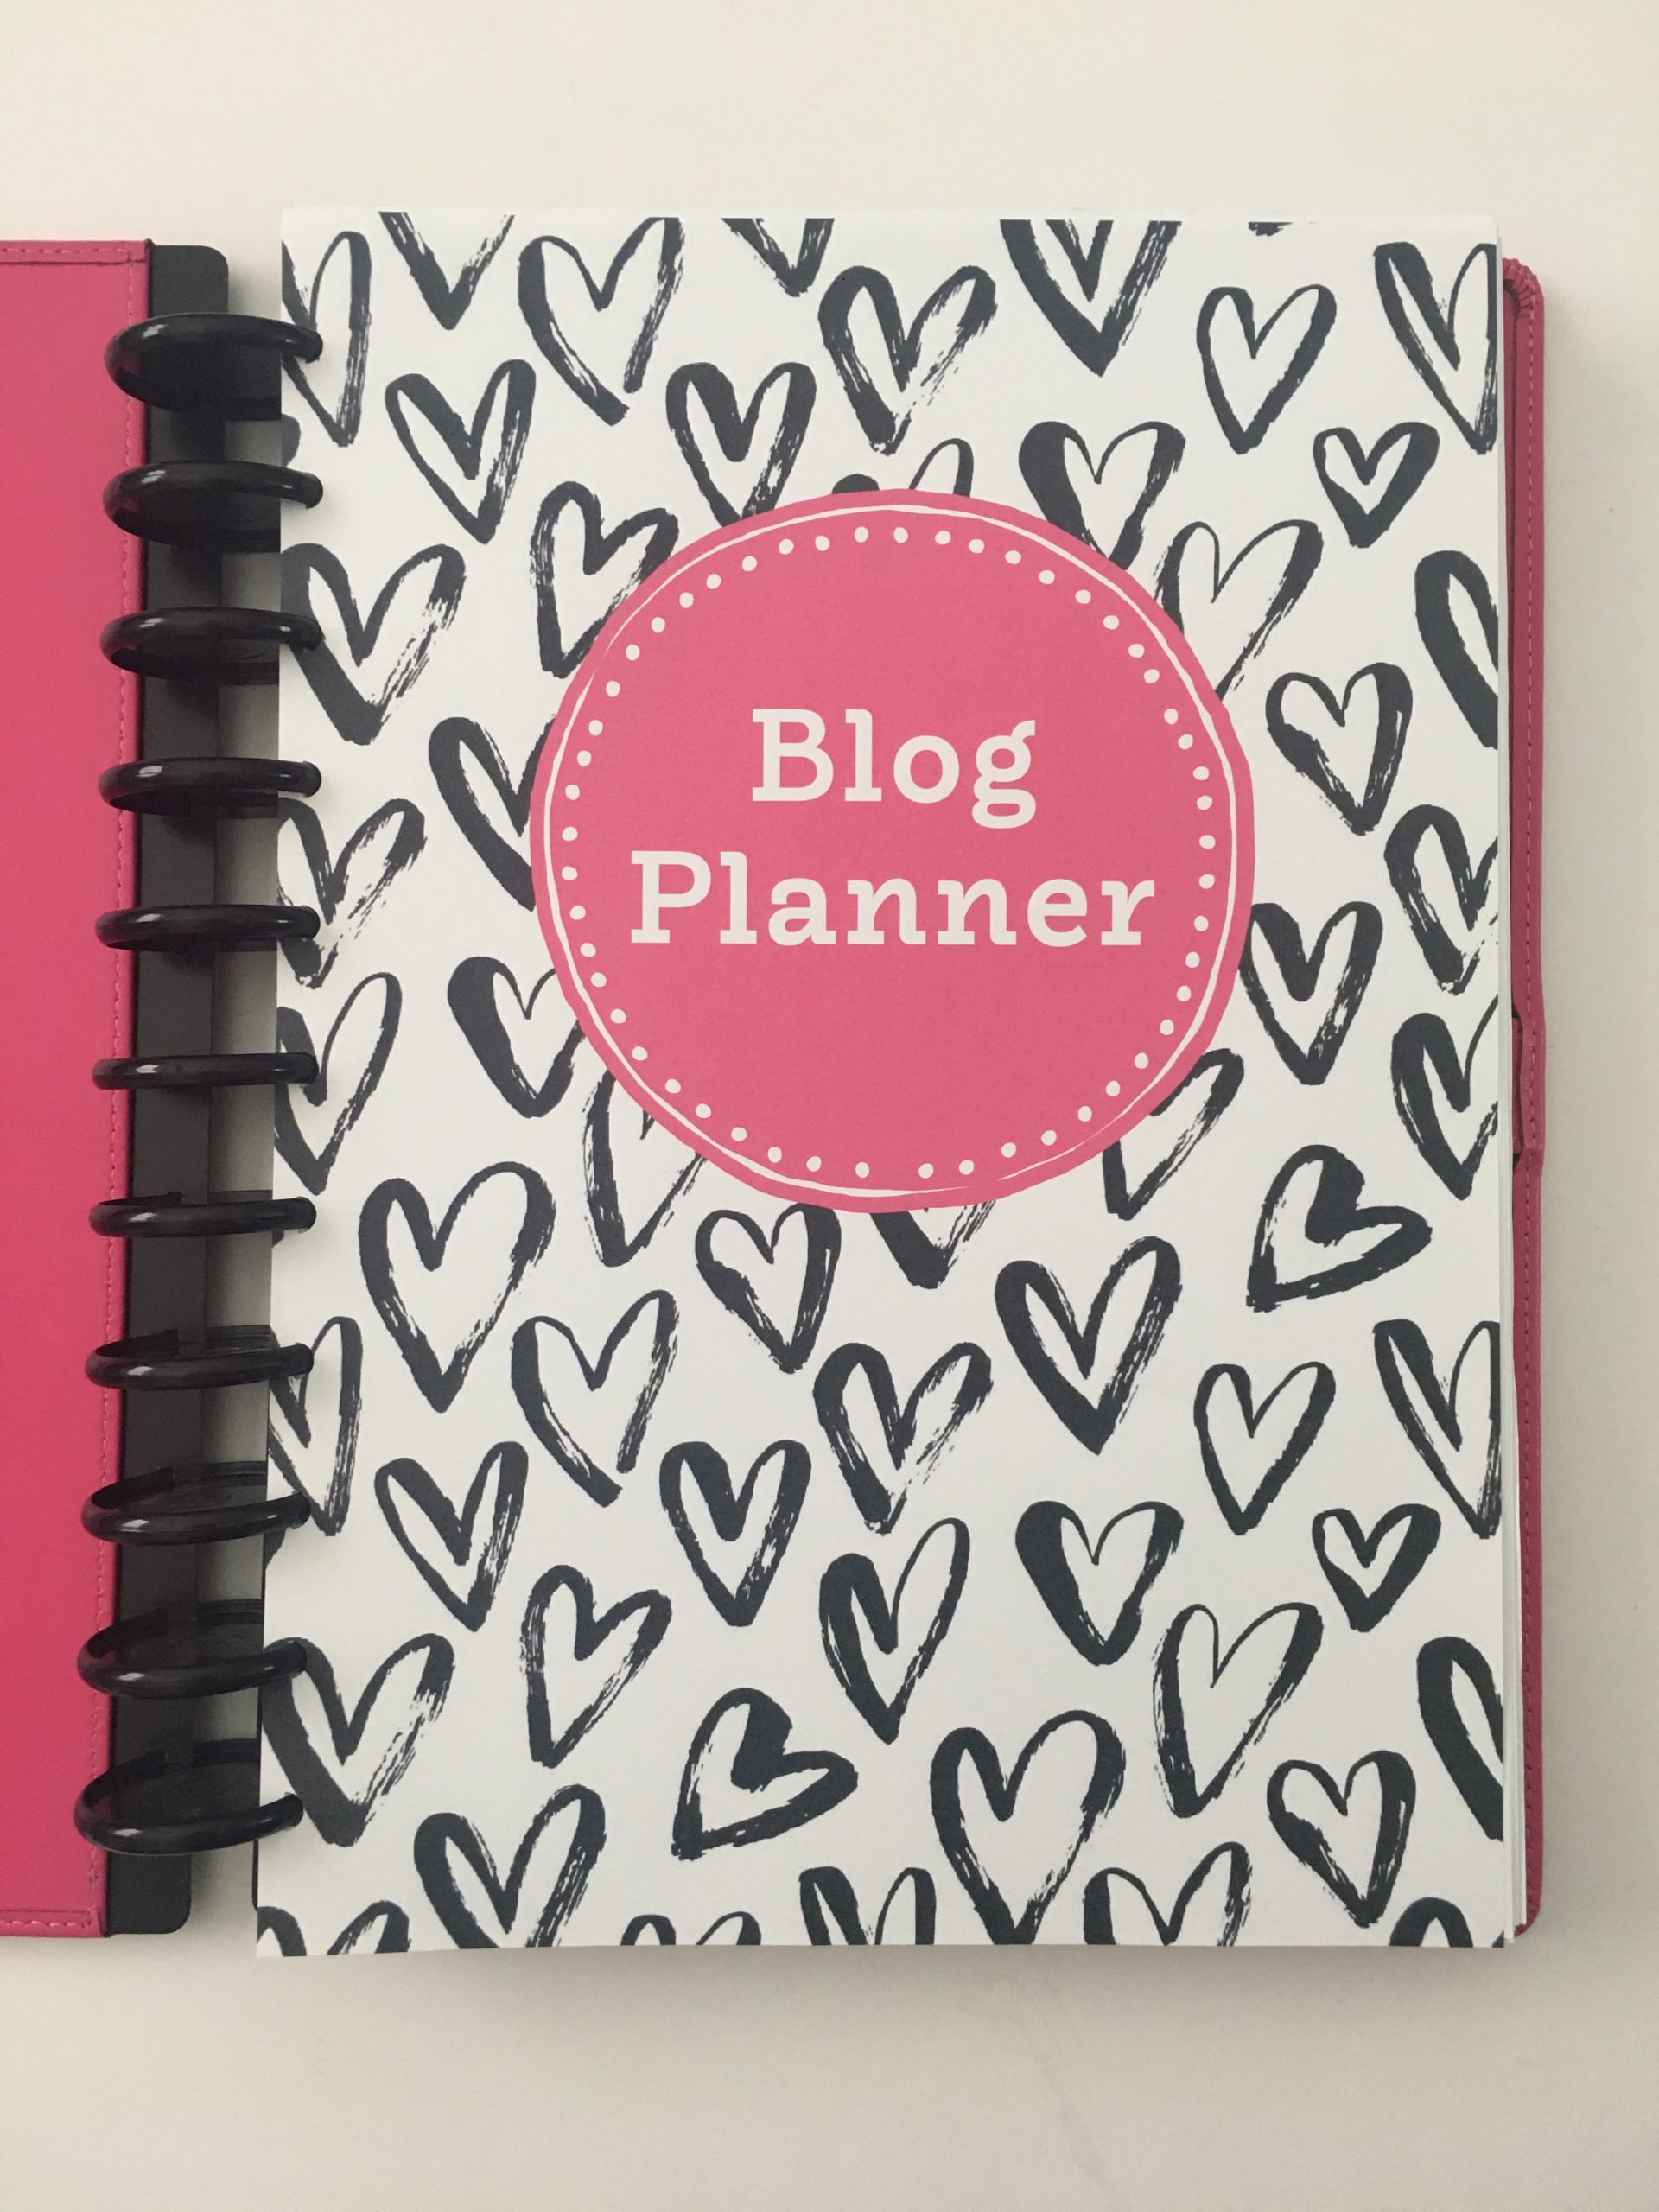 how to make a personalised planner or binder cover using picmonkey step by step video tutorial